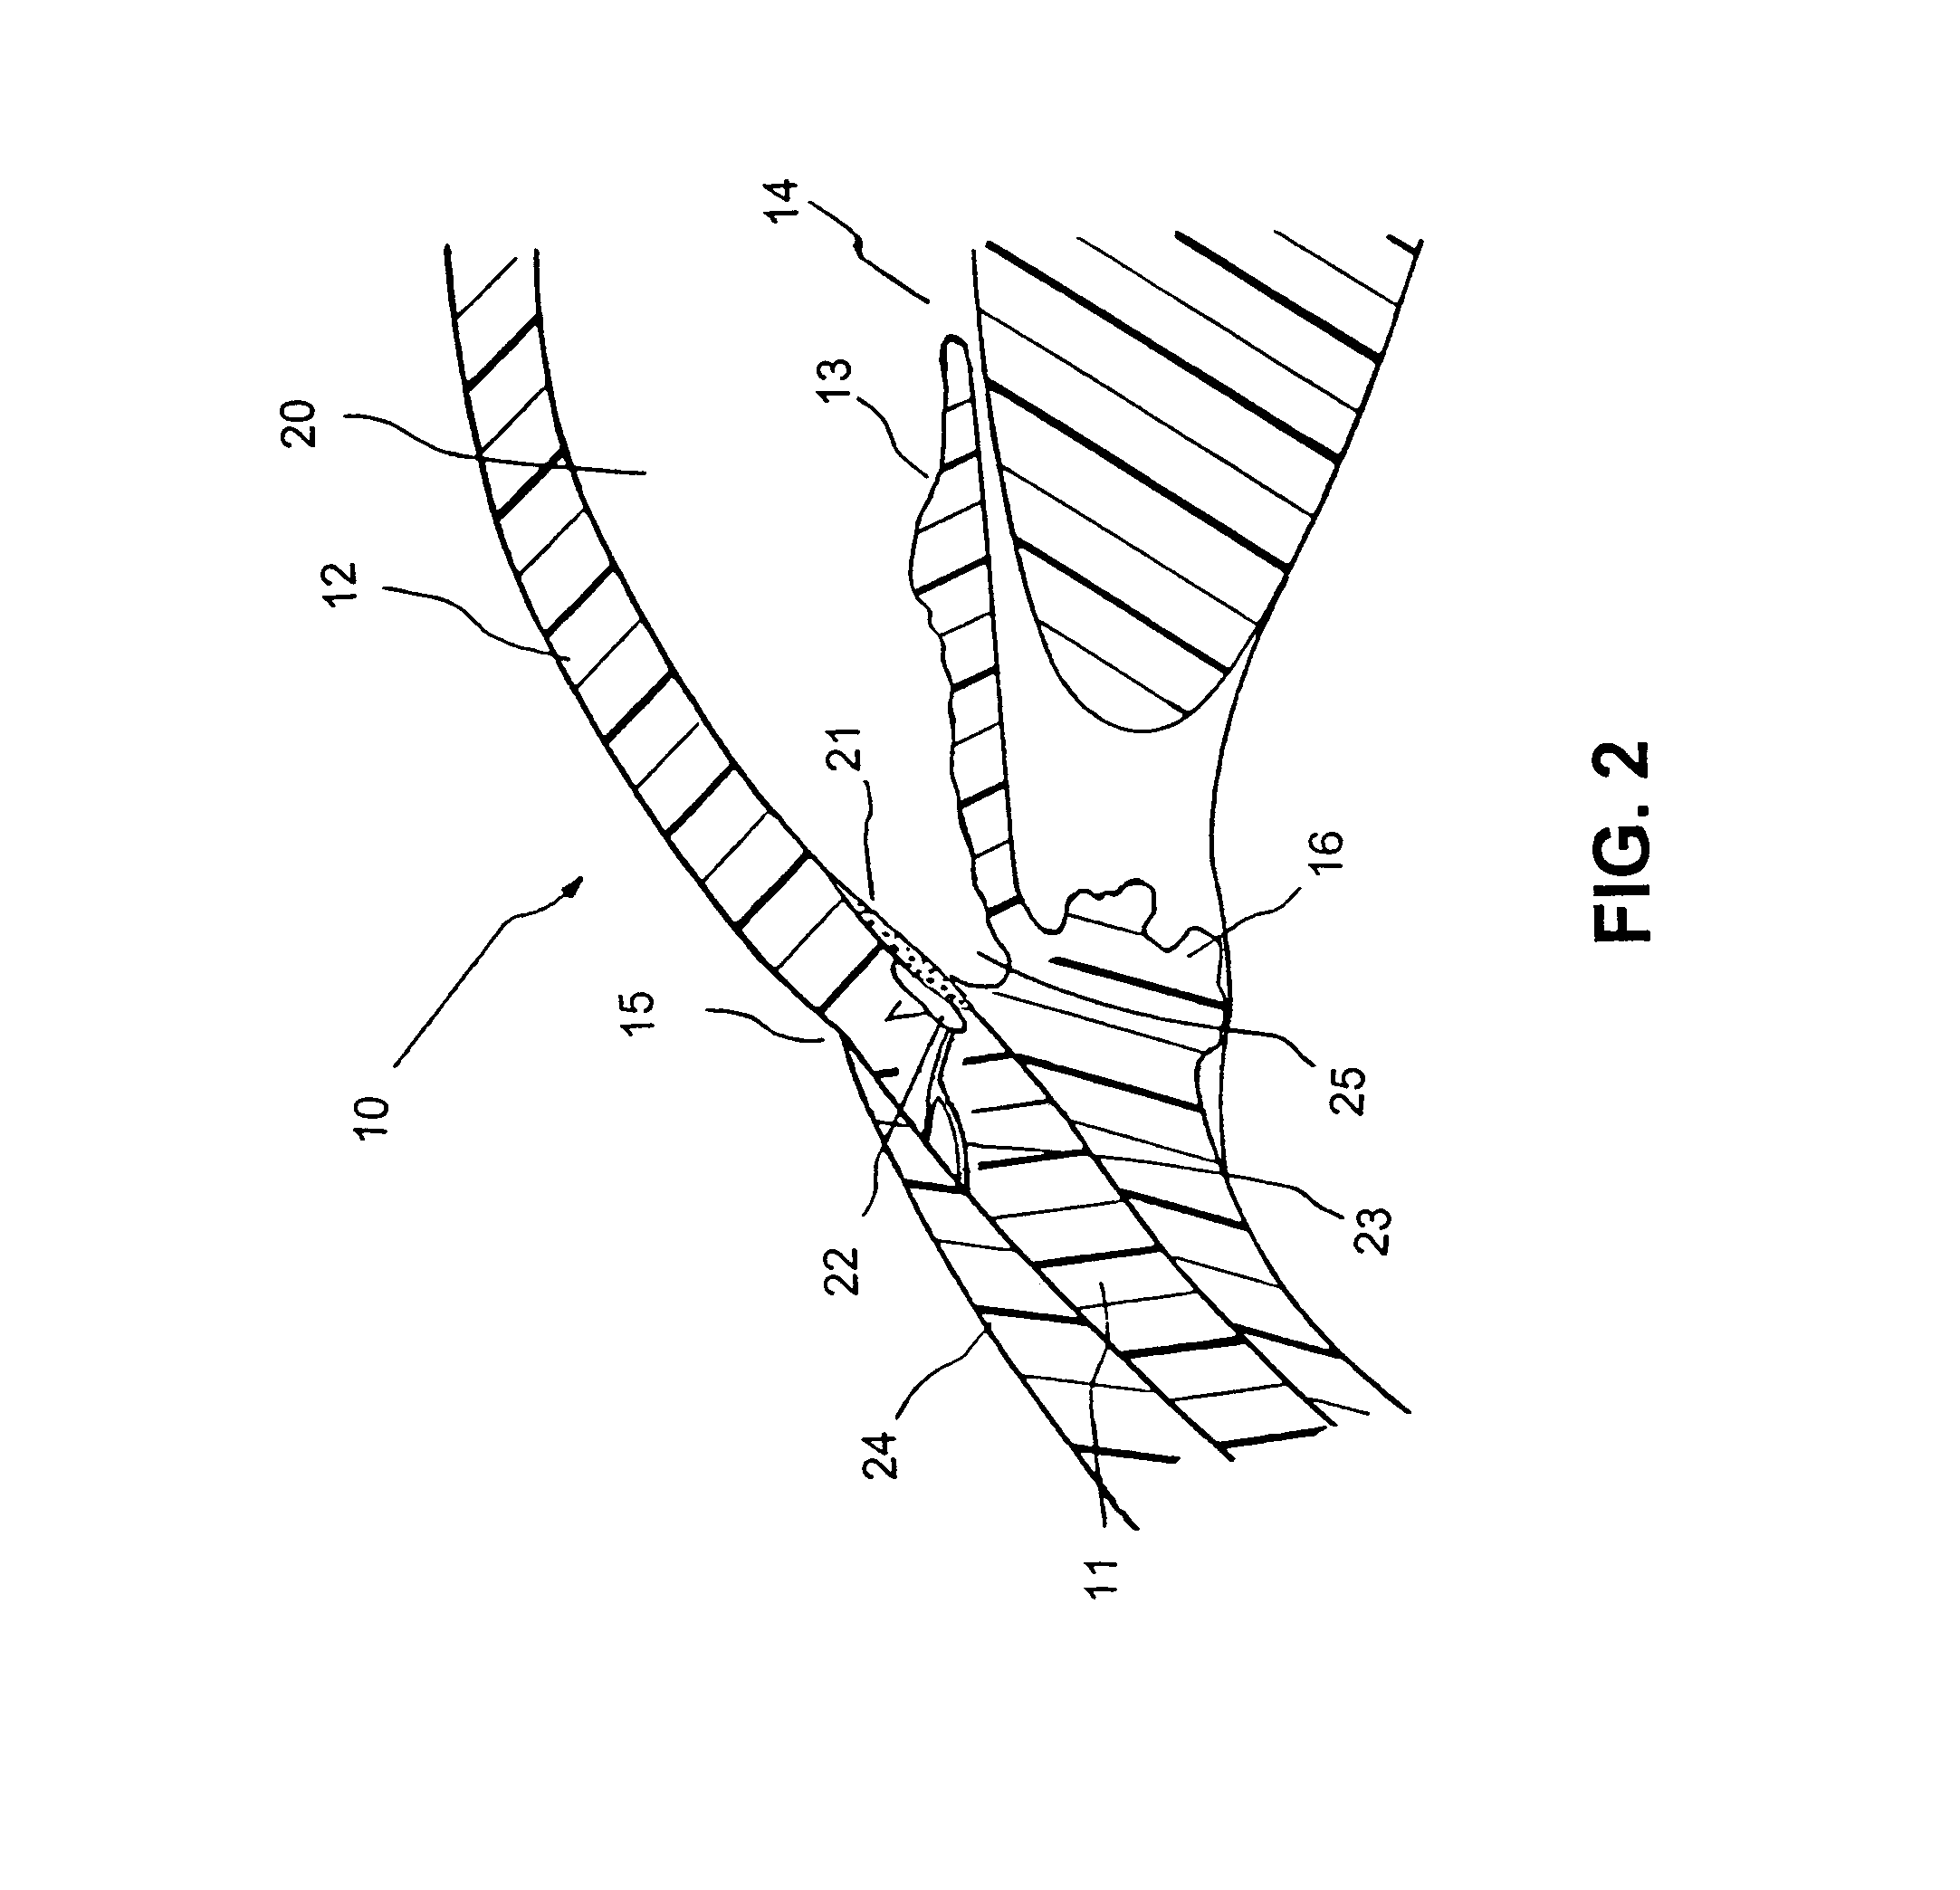 Implant with pressure sensor for glaucoma treatment